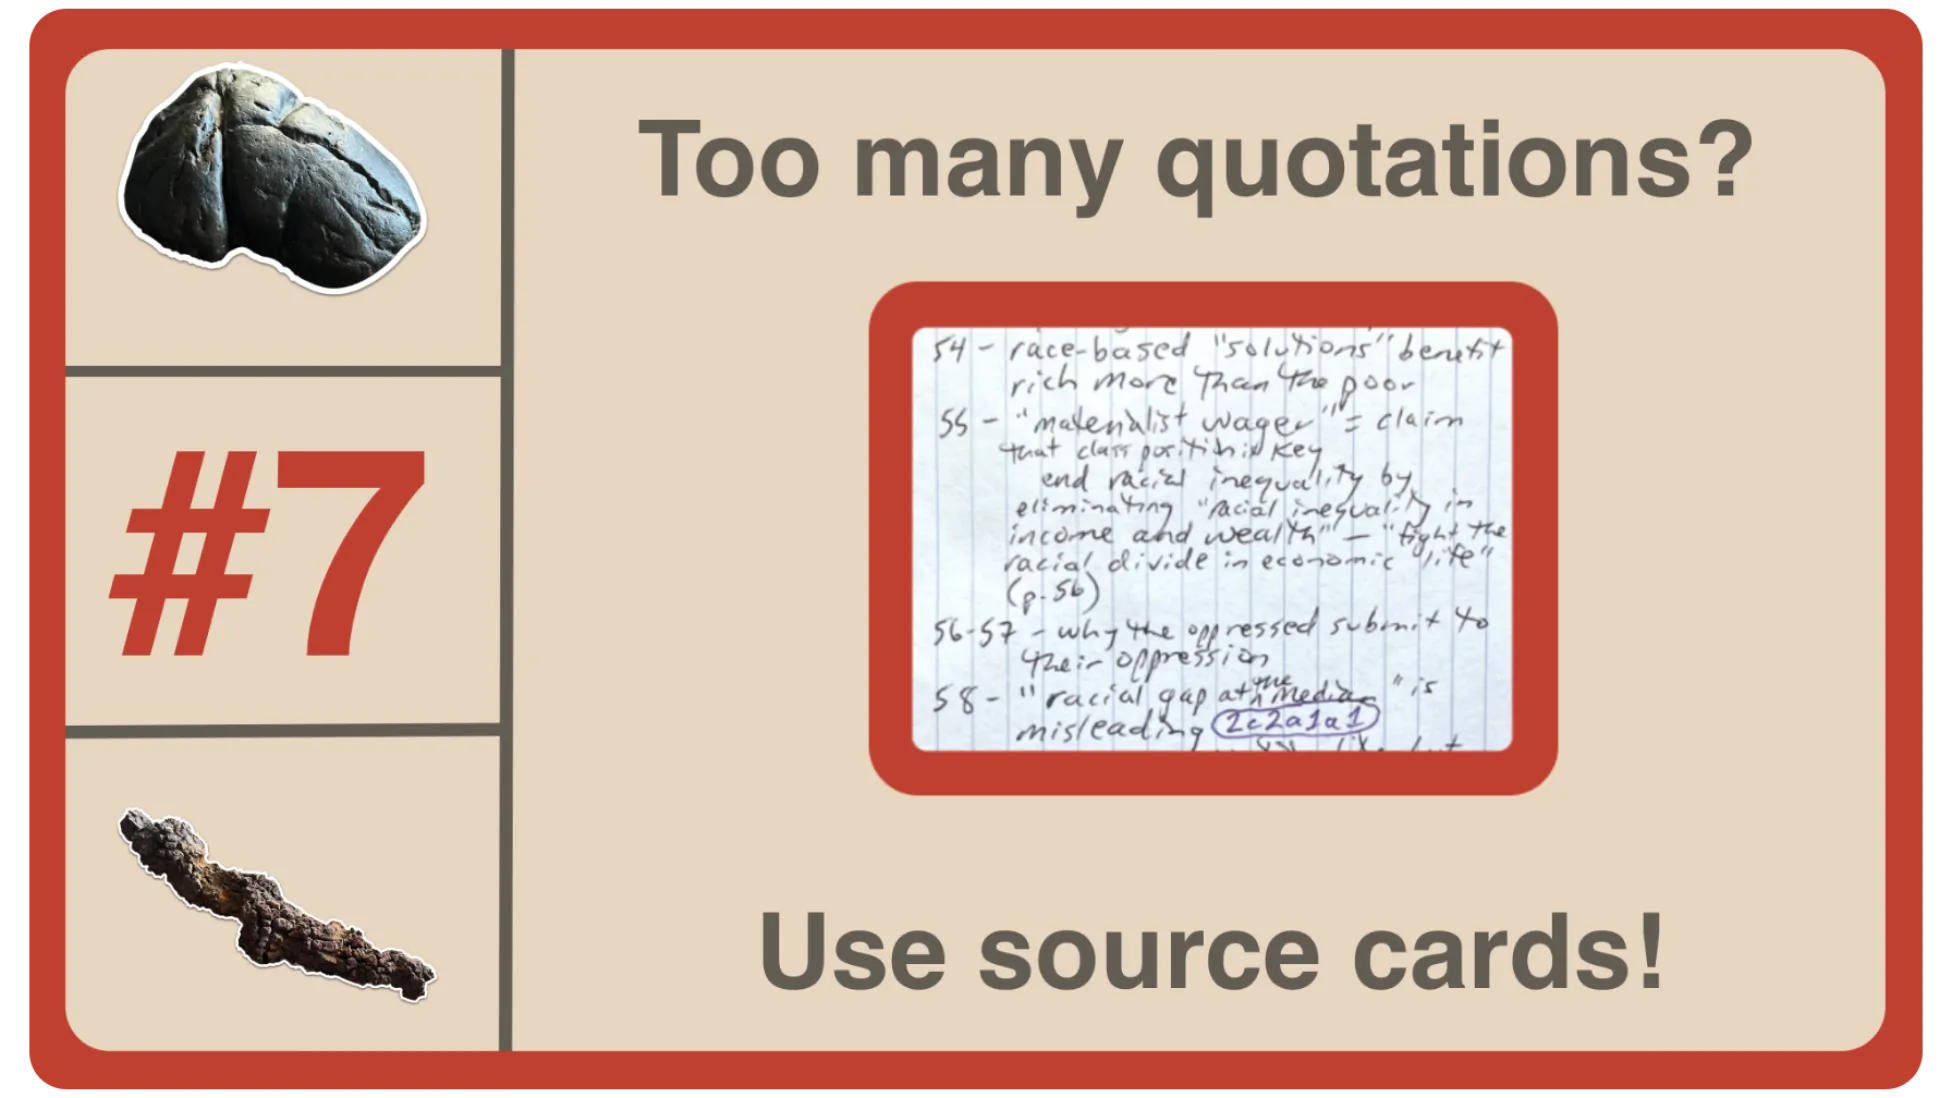 7. Don't collect quotations—instead, handwrite reminders on source cards 📽